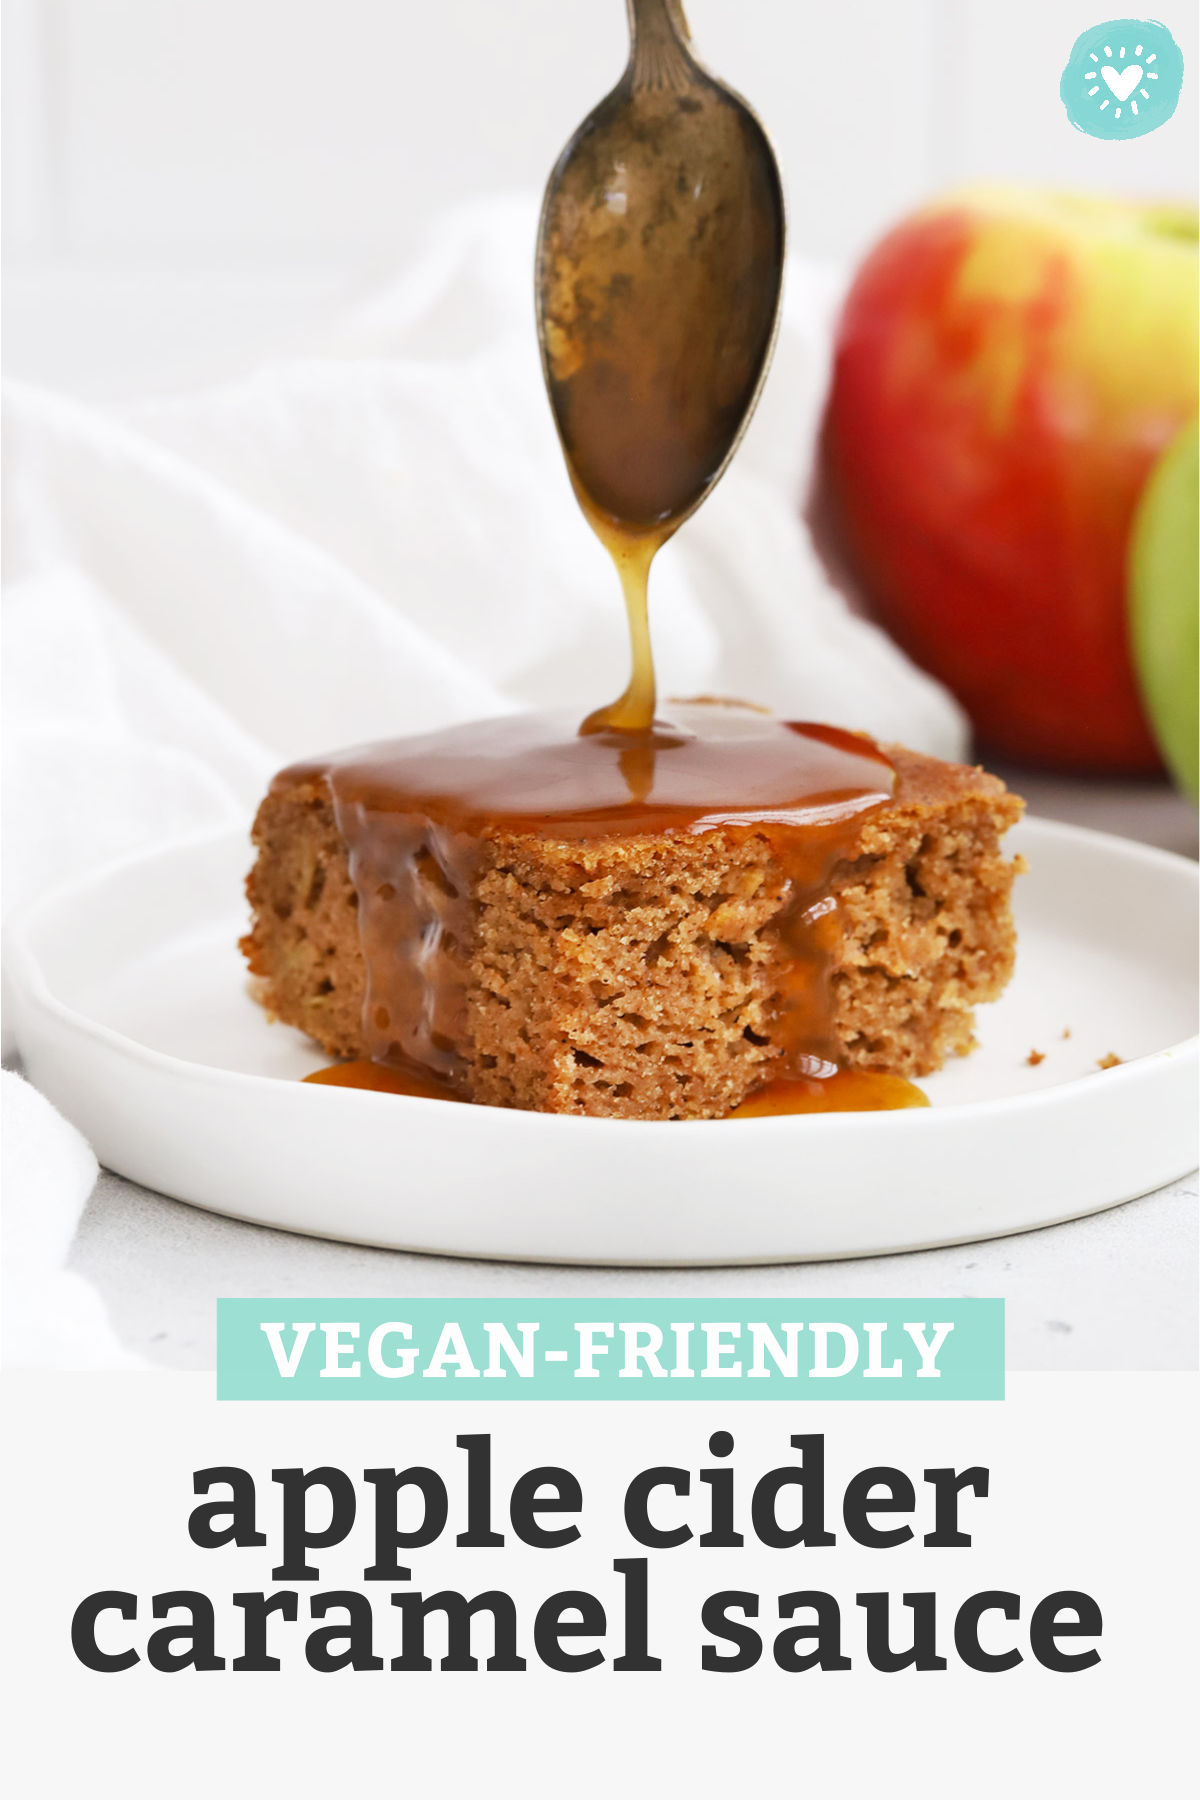 Vegan Cider Caramel Sauce being drizzled over apple spice cake with text overlay that reads "Vegan-Friendly Apple Cider Caramel Sauce"